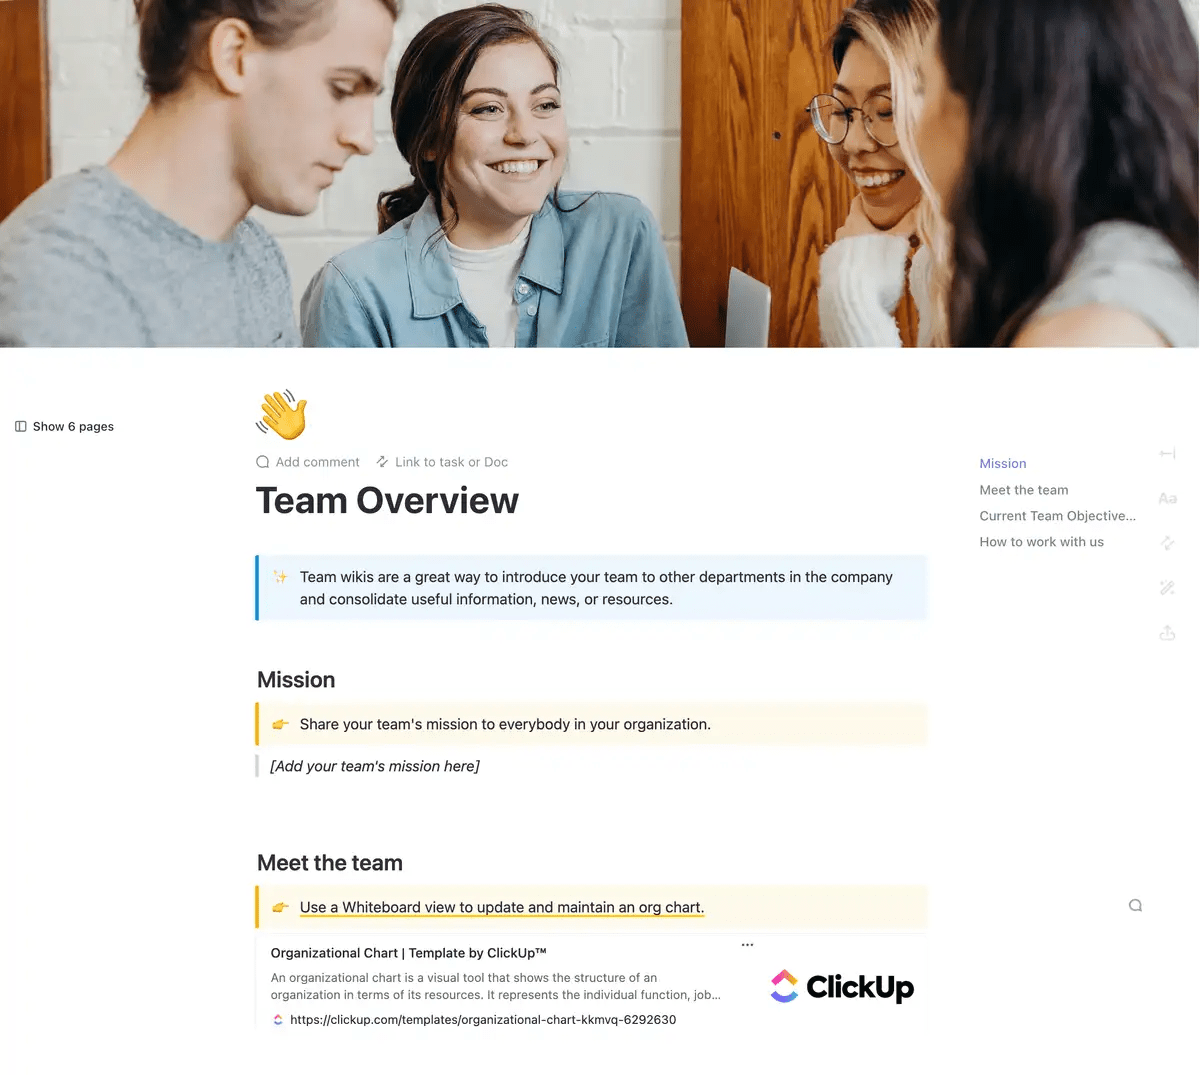 With the ClickUp Wiki Template, easily create informative materials for your team